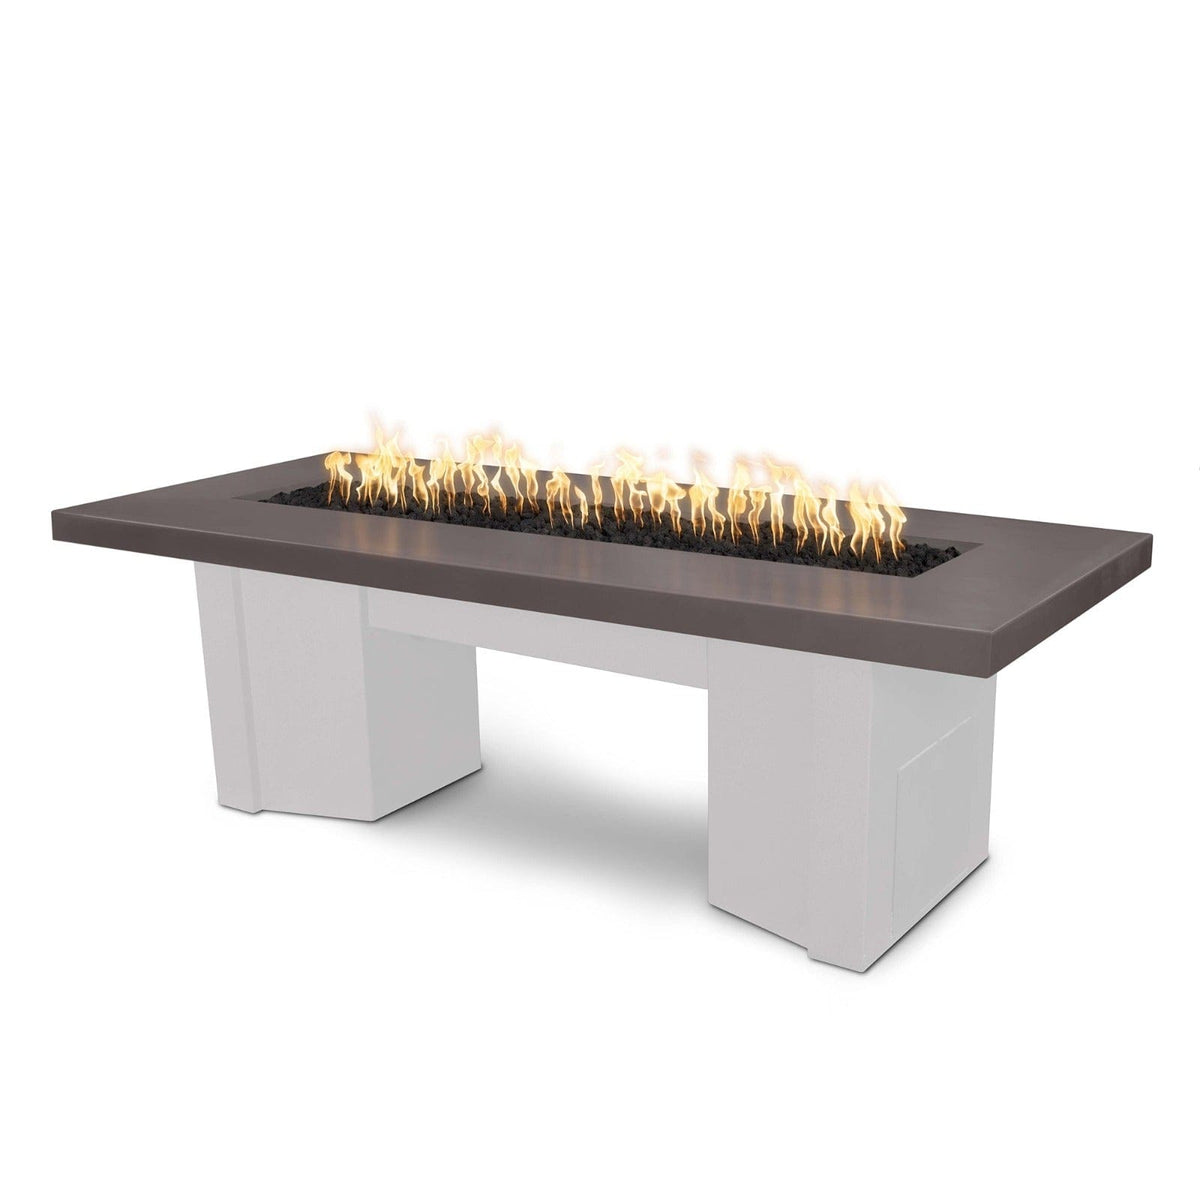 The Outdoor Plus Fire Features Chestnut (-CST) / White Powder Coated Steel (-WHT) The Outdoor Plus 60&quot; Alameda Fire Table Smooth Concrete in Liquid Propane - Match Lit with Flame Sense System / OPT-ALMGFRC60FSML-LP